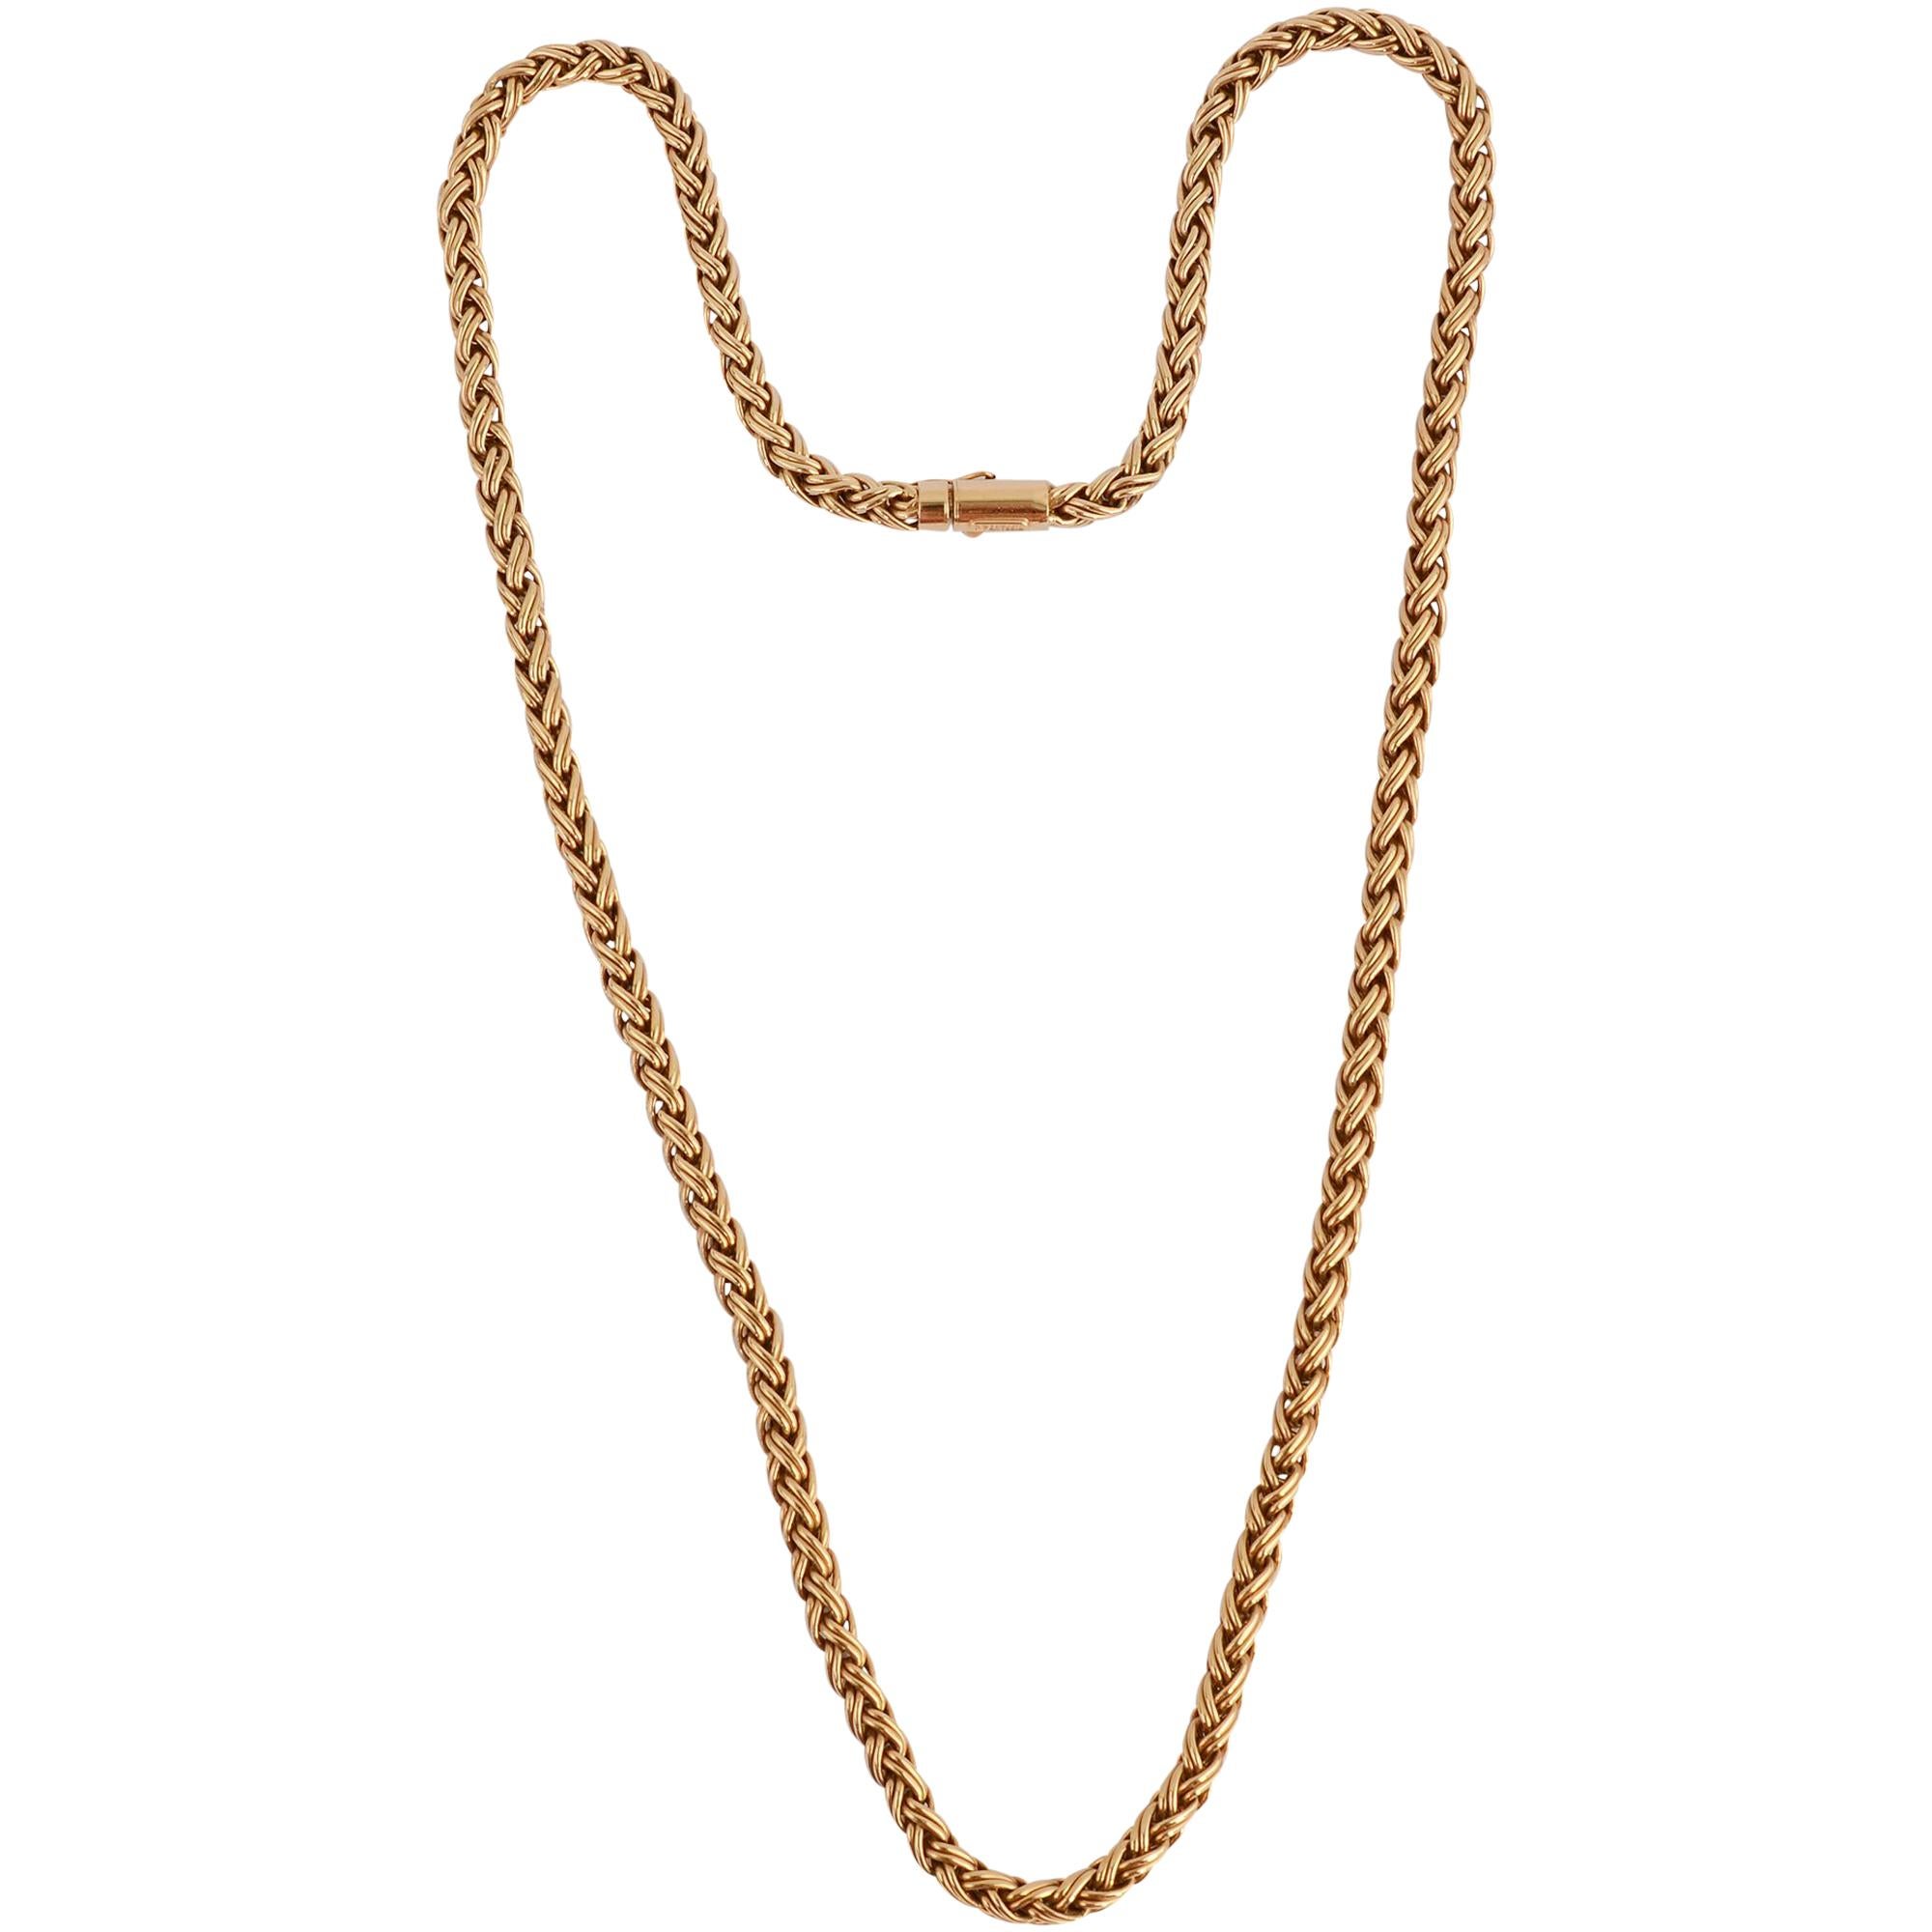 Tiffany & Co. Gold Wheat Chain Necklace